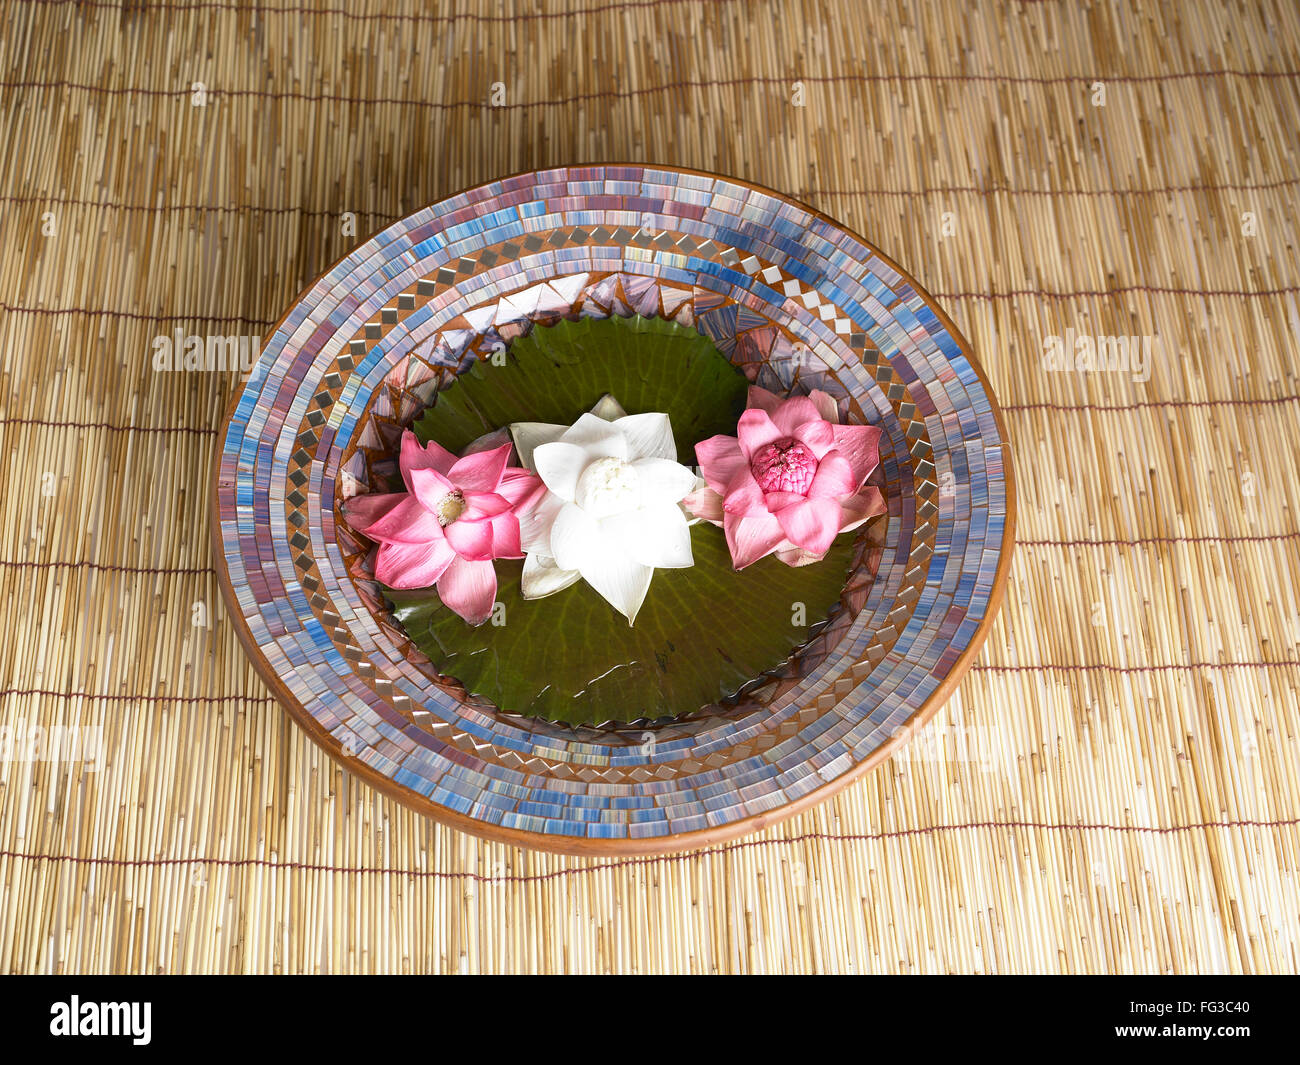 Two red and one white lotus flower kept in plate on the wooden mat Stock Photo